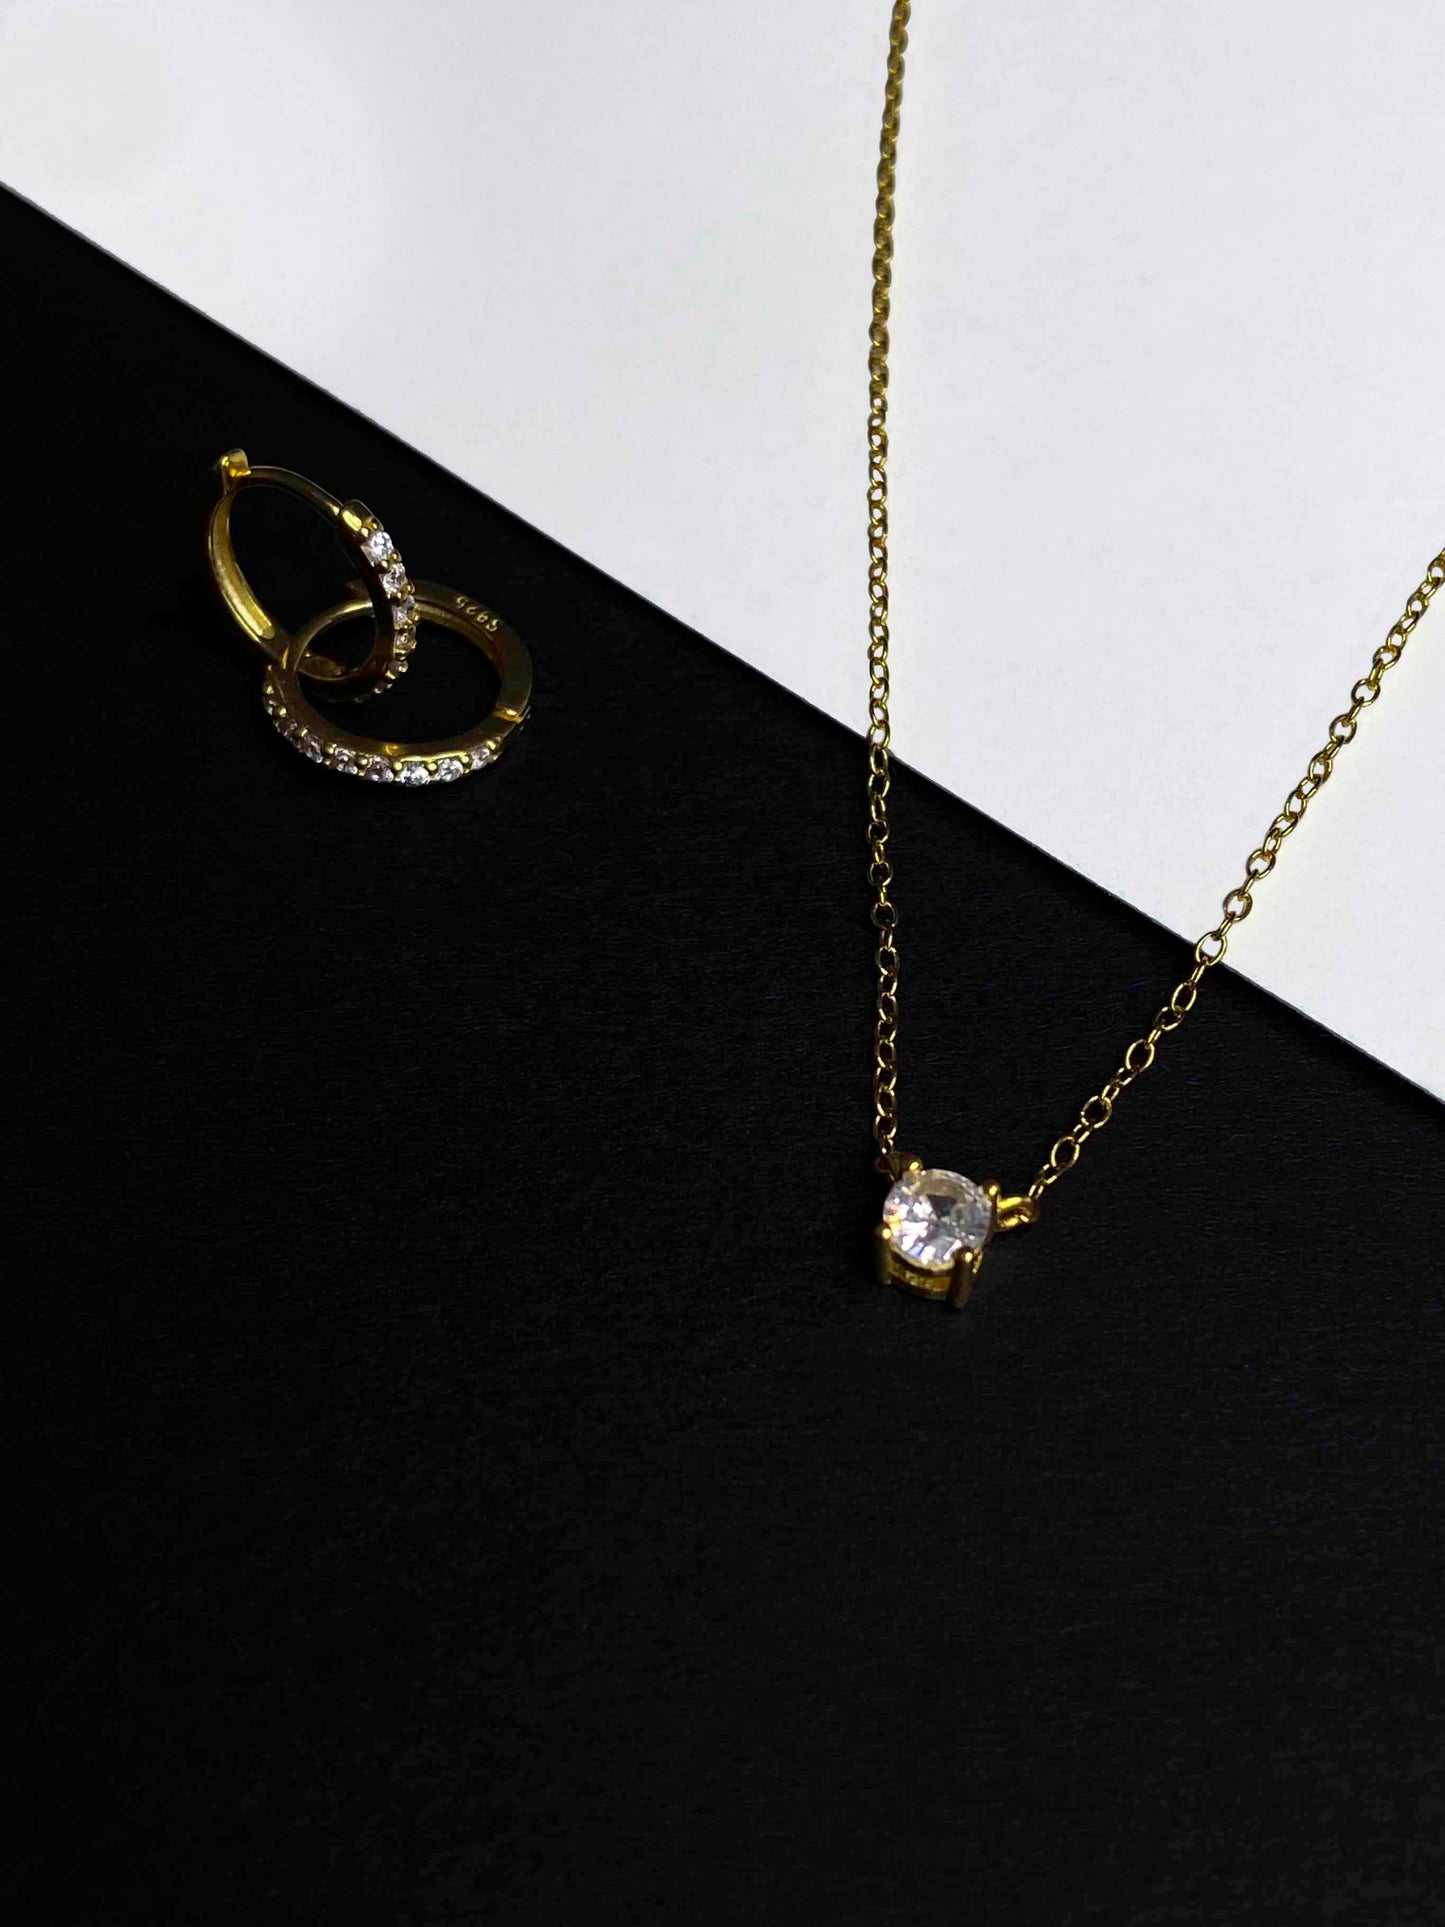 Gold-plated chain link necklace and hoop earrings with zirconia stones.